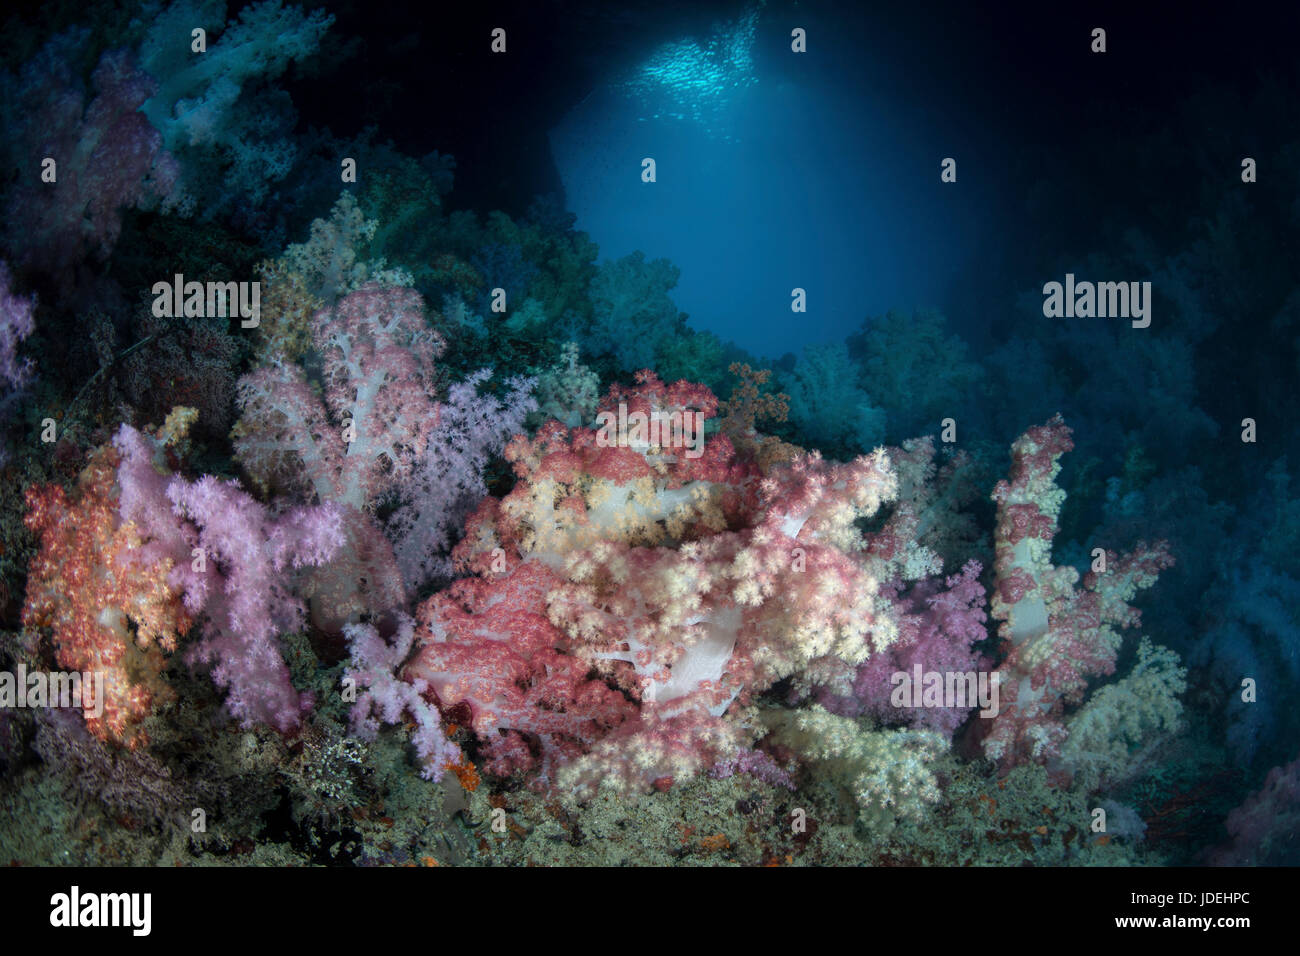 Colored Soft Corals, Dendronephthya, Micronesia, Palau Stock Photo